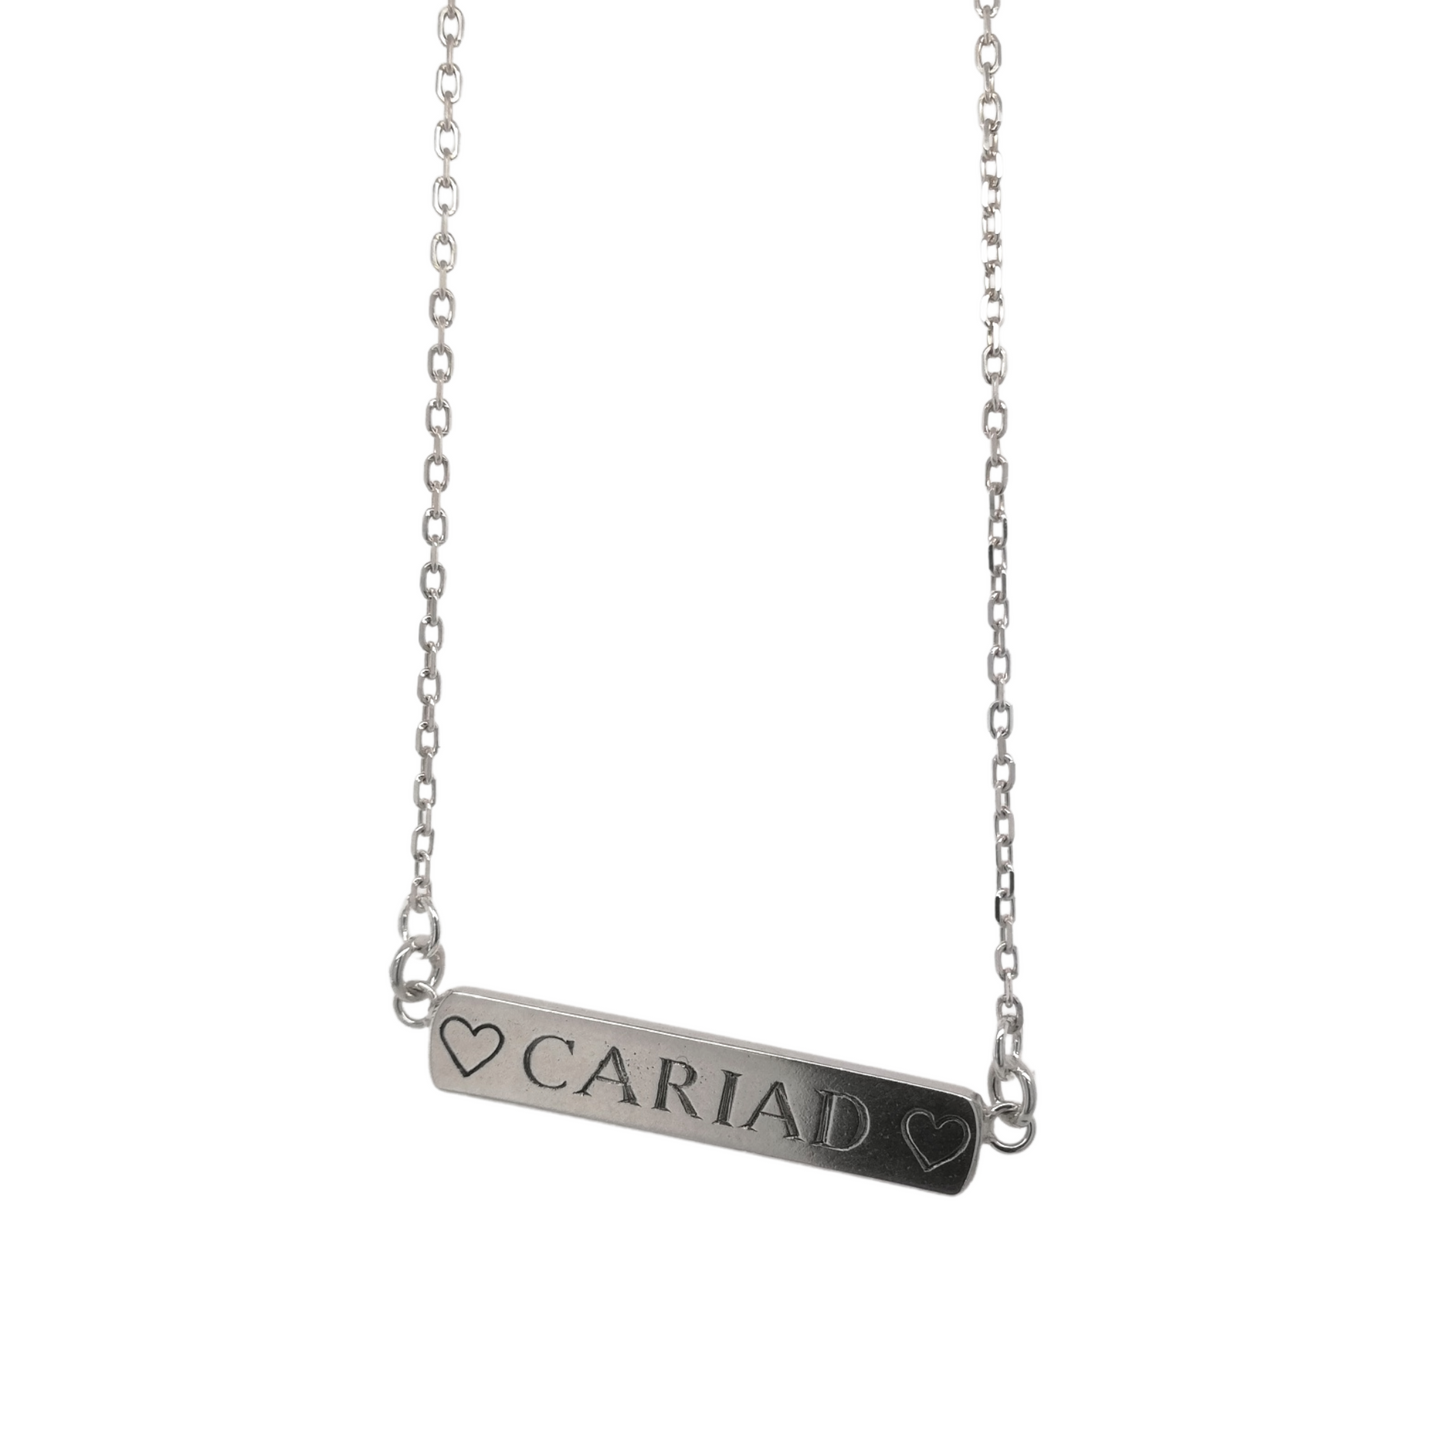 Cariad I.D. Necklace